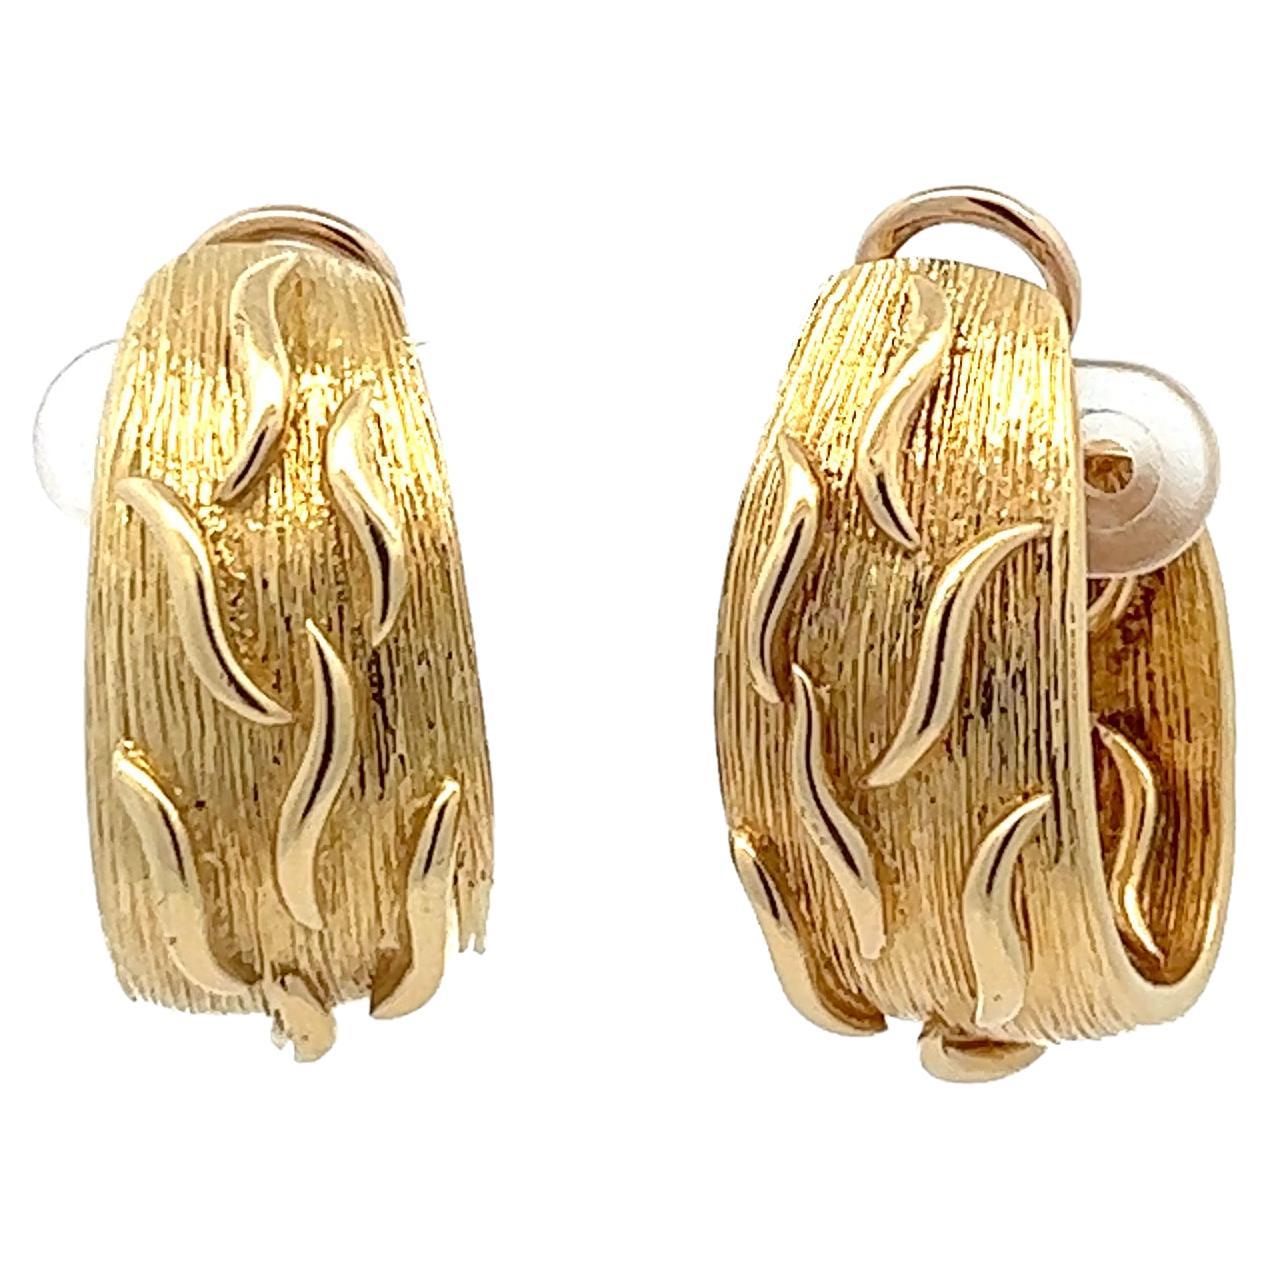 A pair of 18k yellow gold ear clips by Kutchinsky.